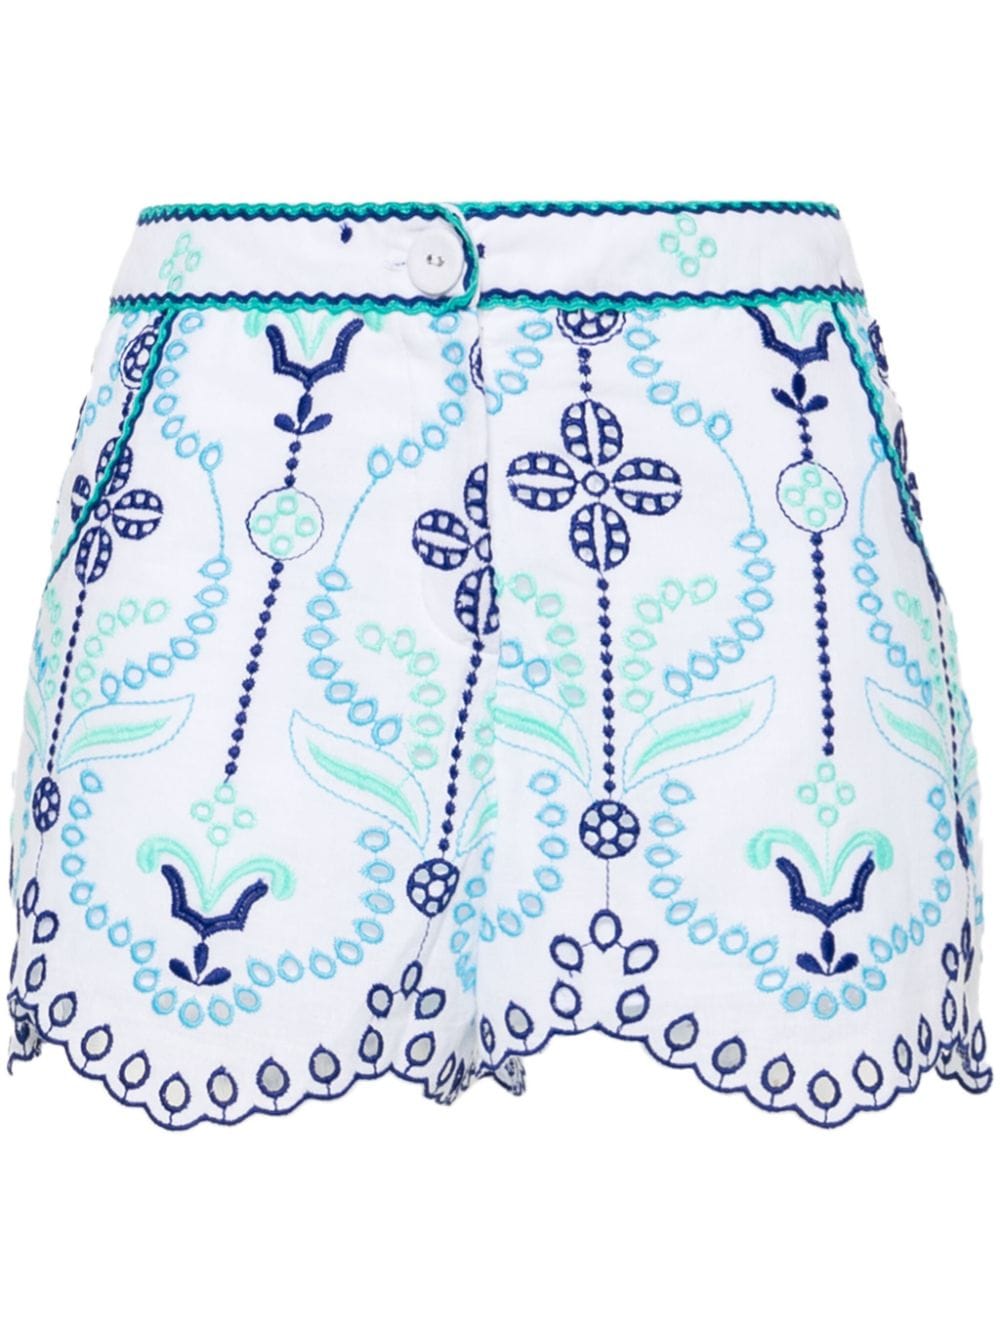 Mason floral-embroidered shorts